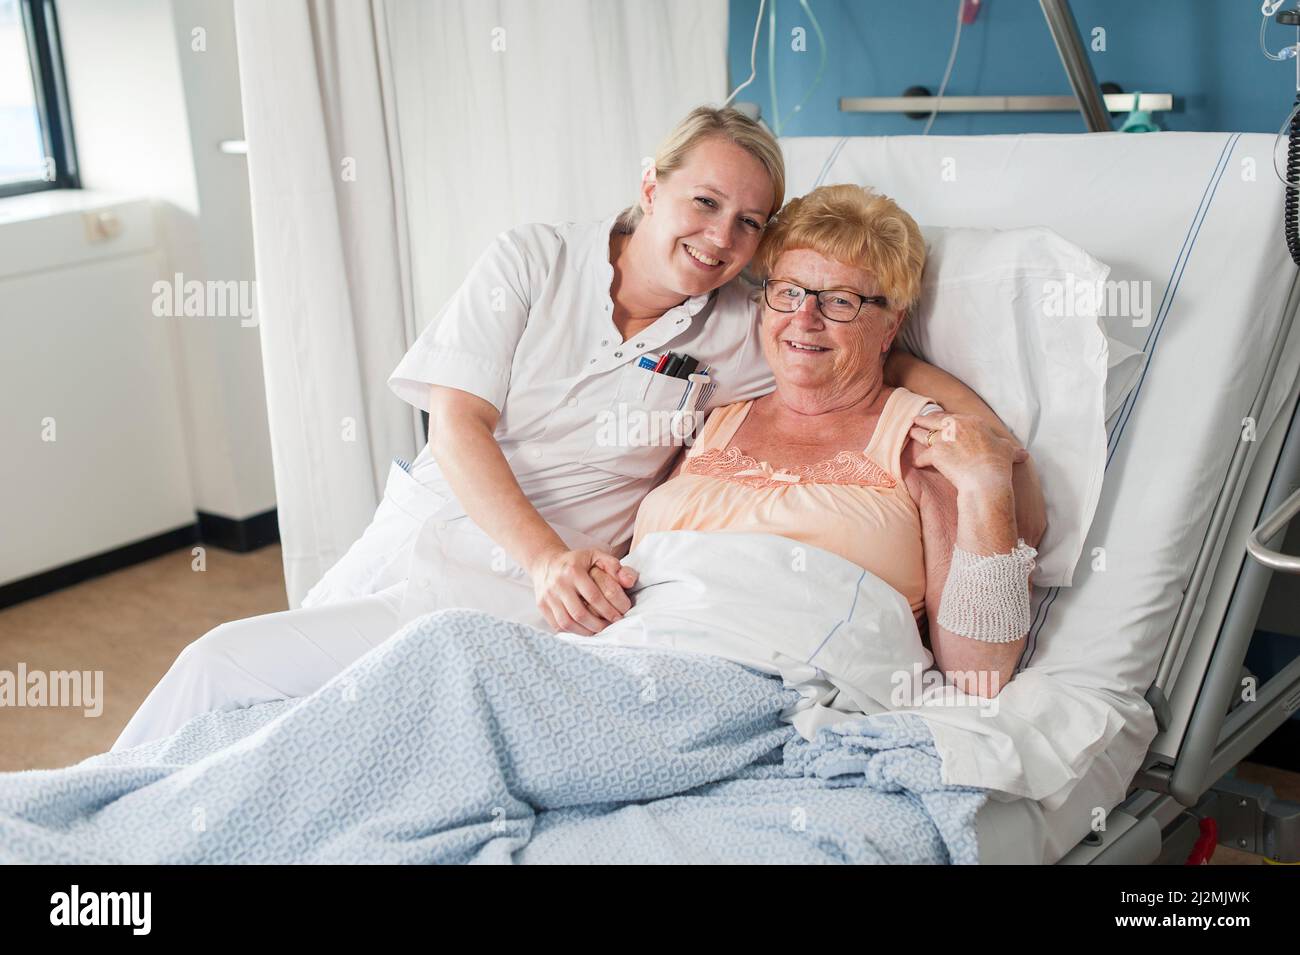 Smiling nurse and patient Stock Photo